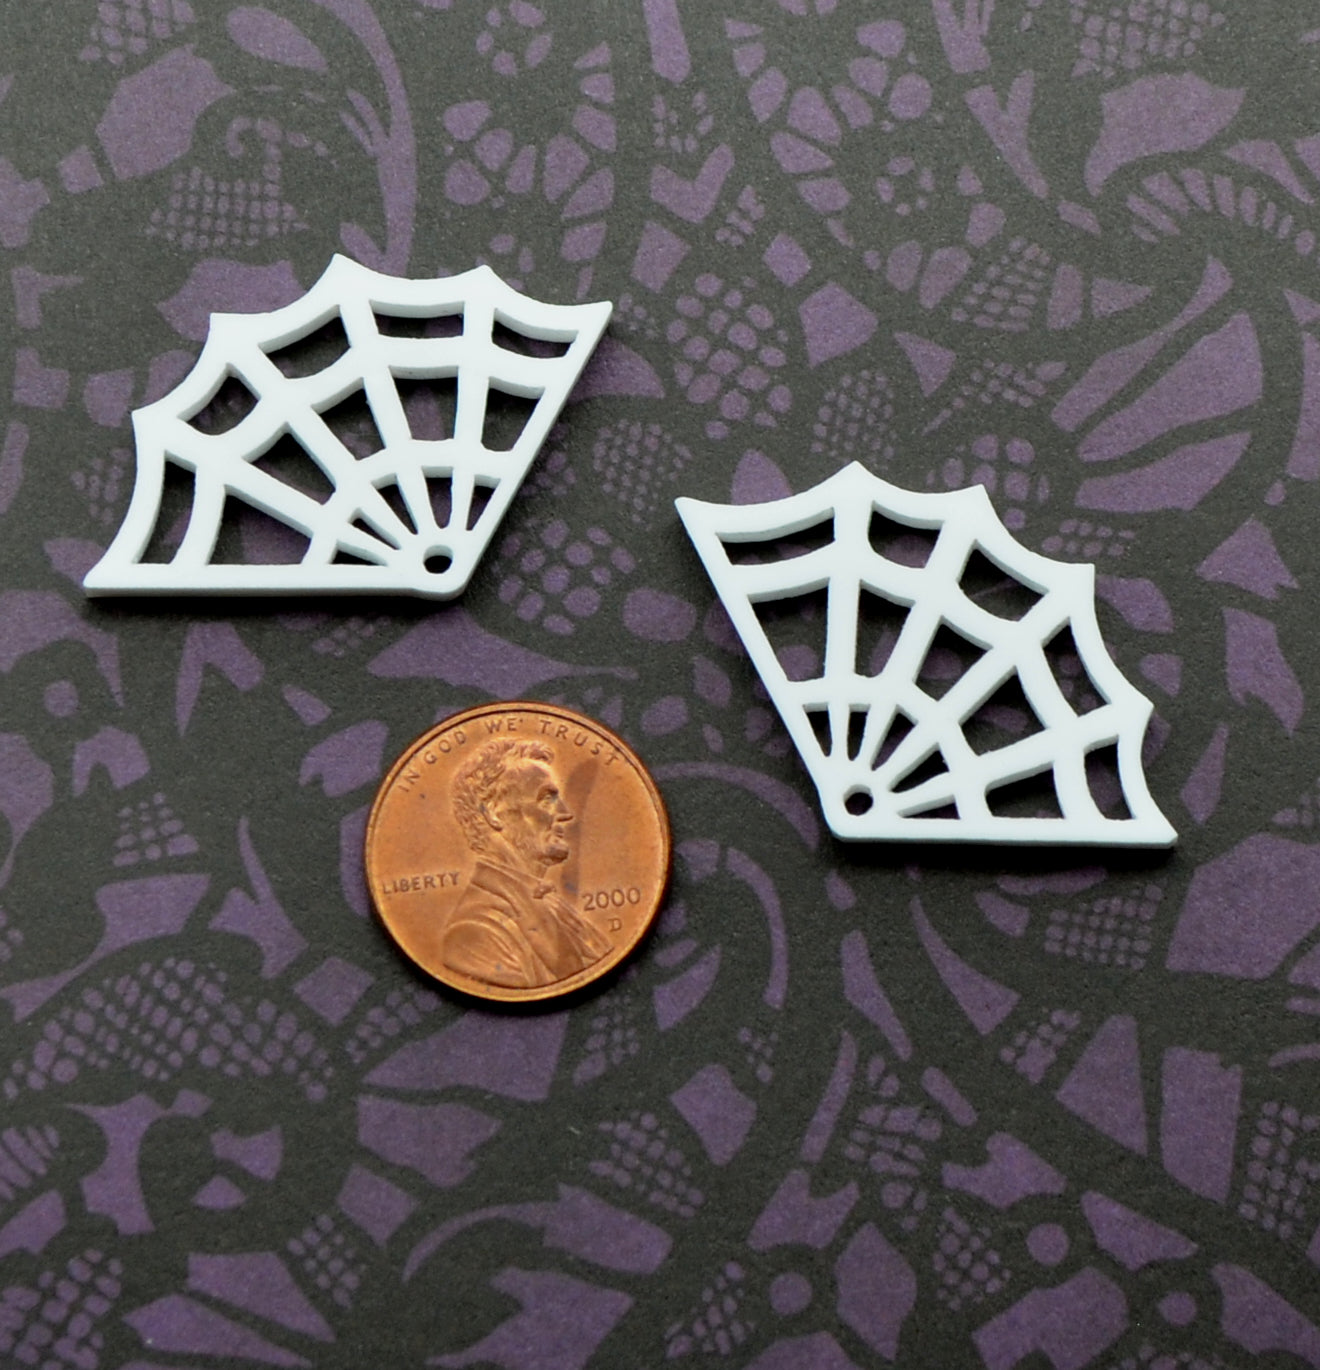 WHITE WEB CHARMS Spiderweb Charms in Black Laser Cut Acrylic